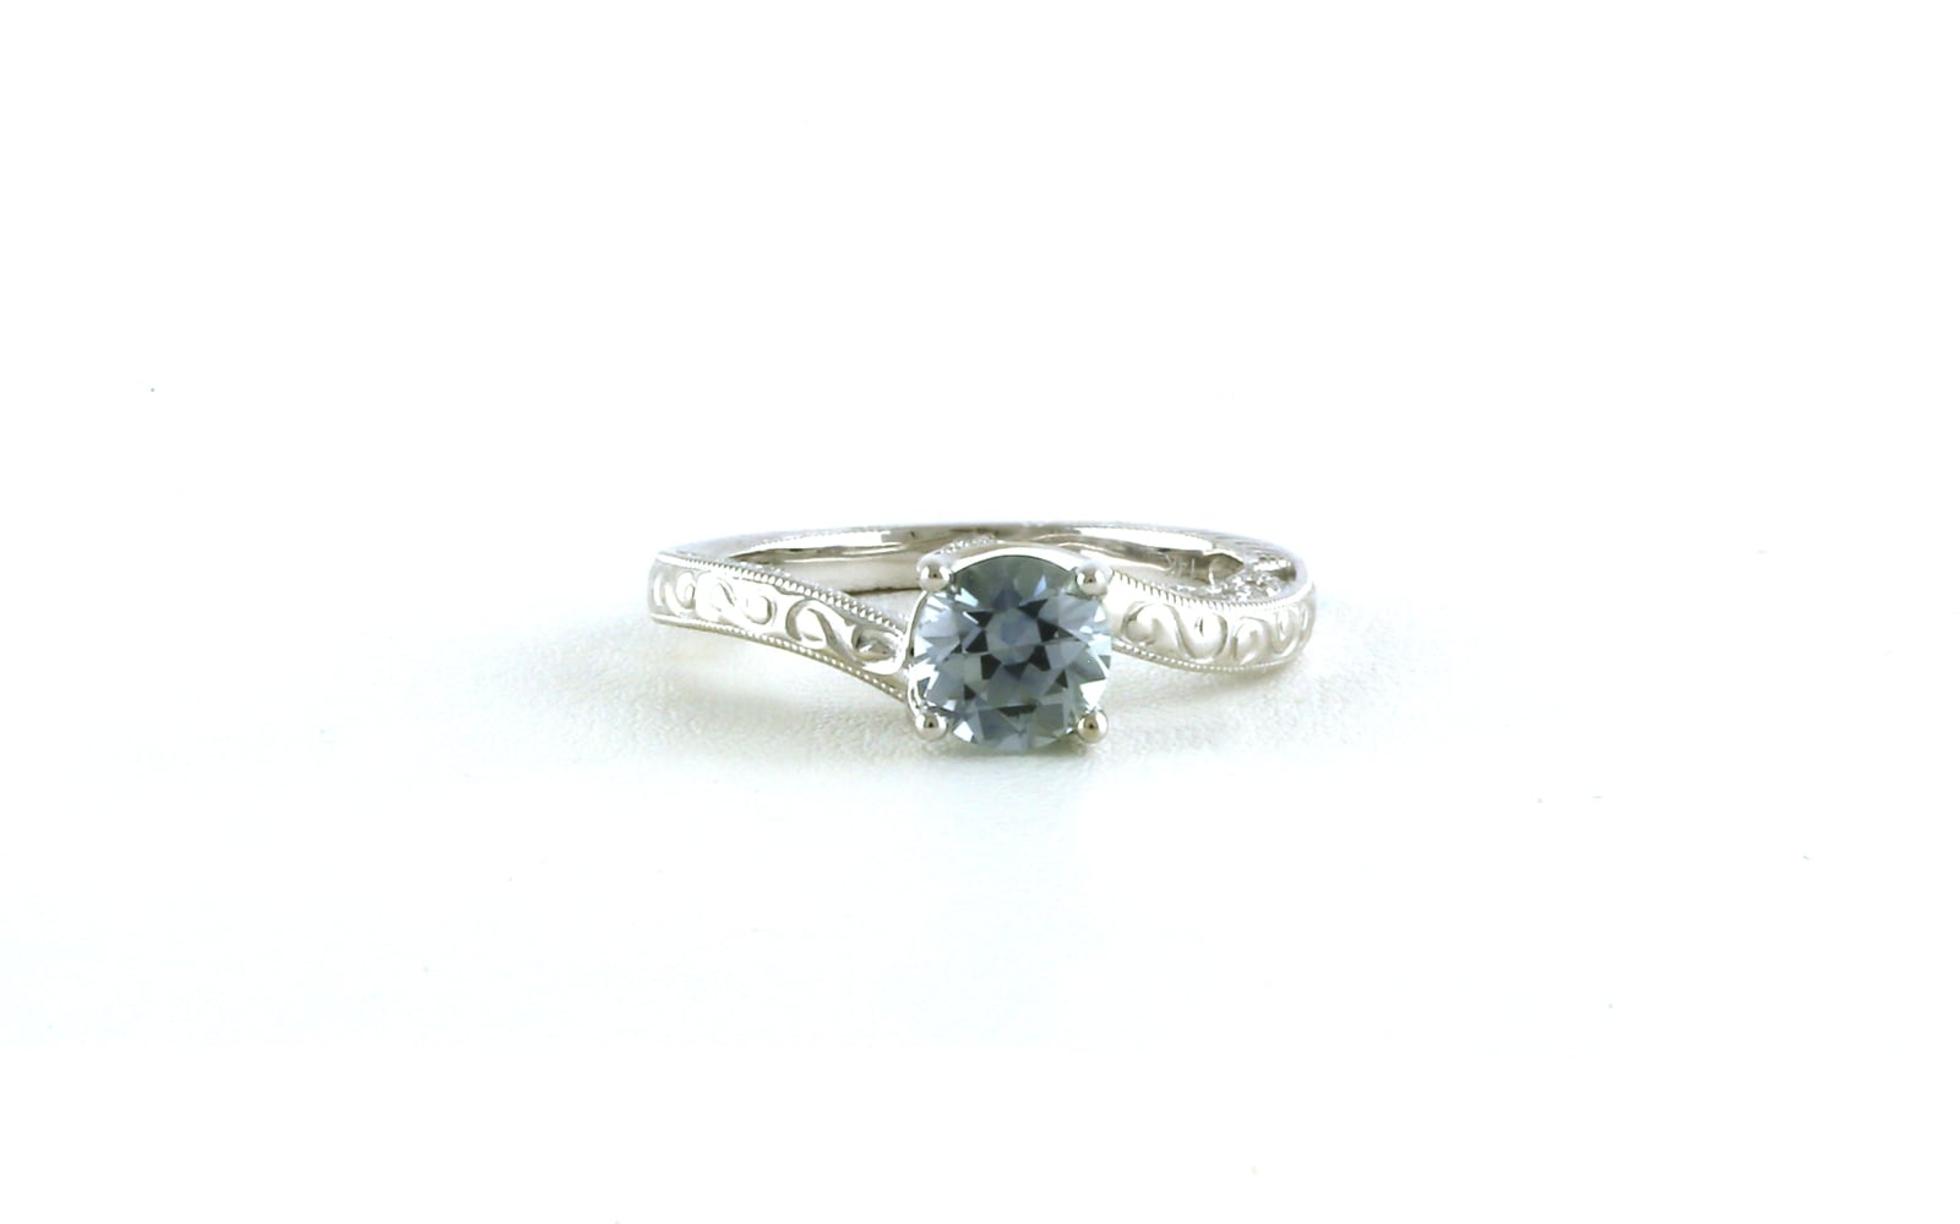 Solitaire-style Montana Sapphire Ring with Hand-engraved Band (1.13cts TWT)